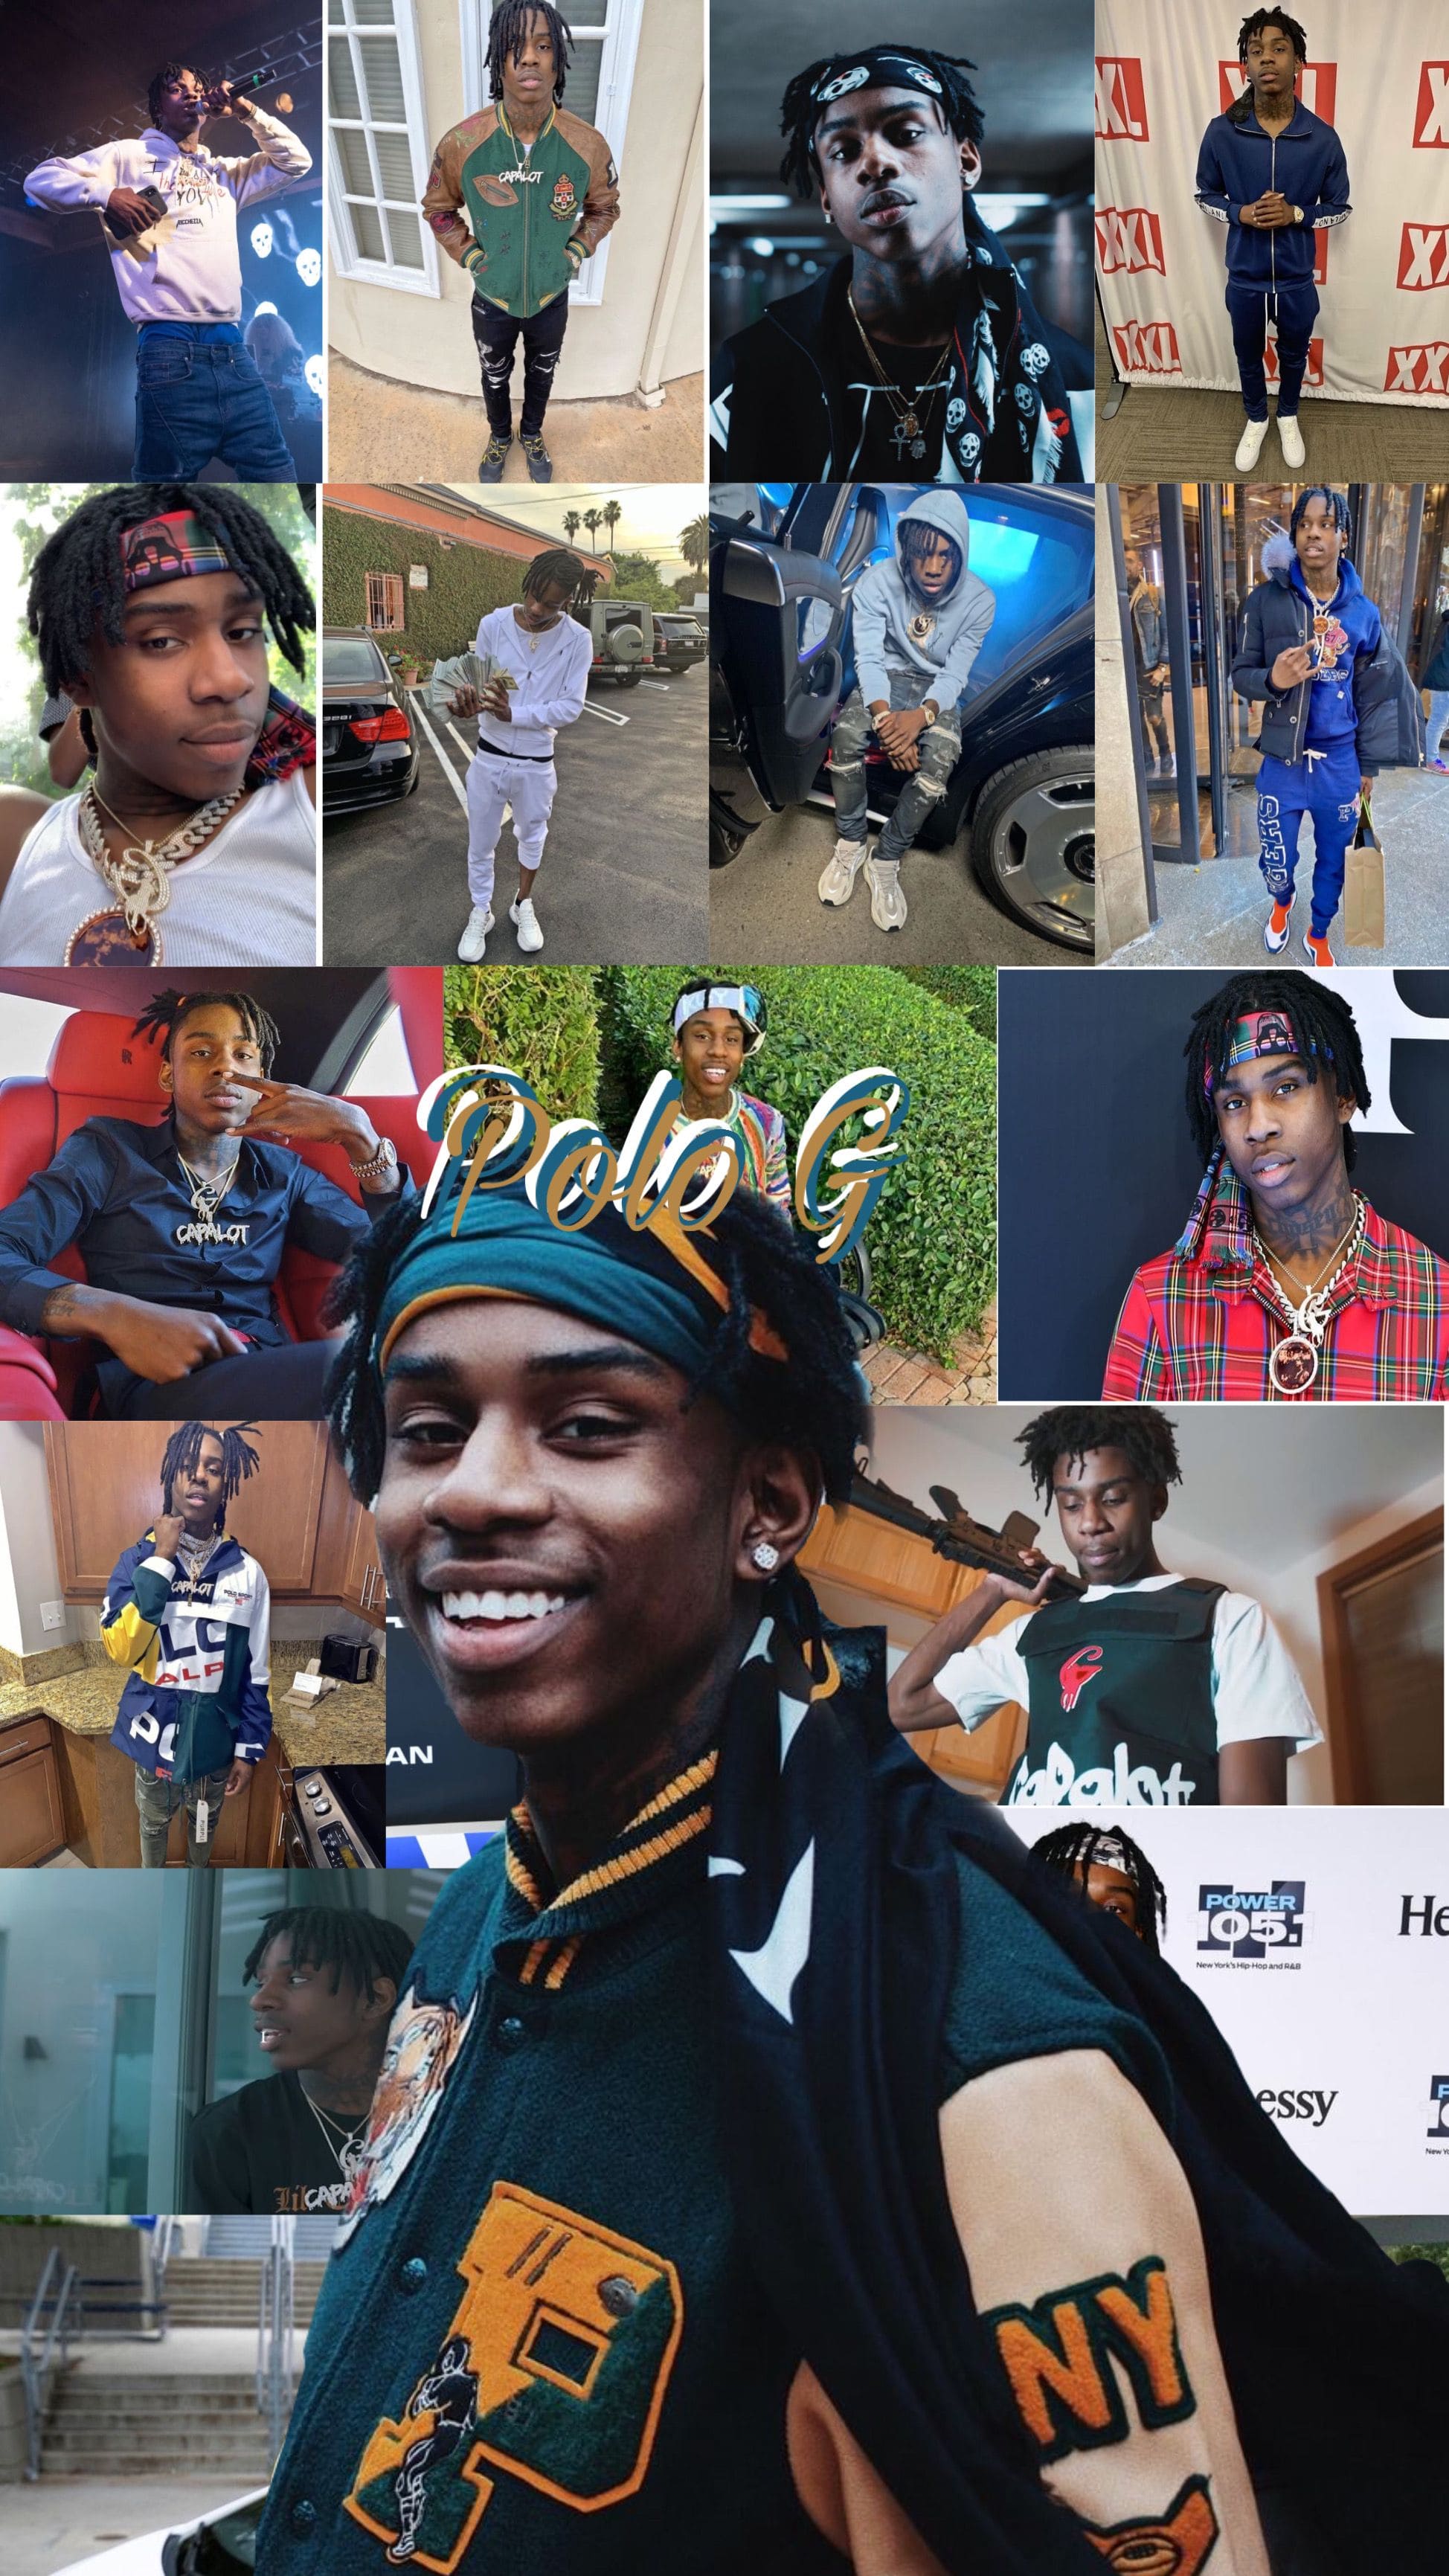 Polo G Wallpaper Discover more cool g aesthetic Iphone lil tjay  Lockscreen wallpapers httpswwwenjpgcompolo  Cute rappers Rapper  Celebrity wallpapers